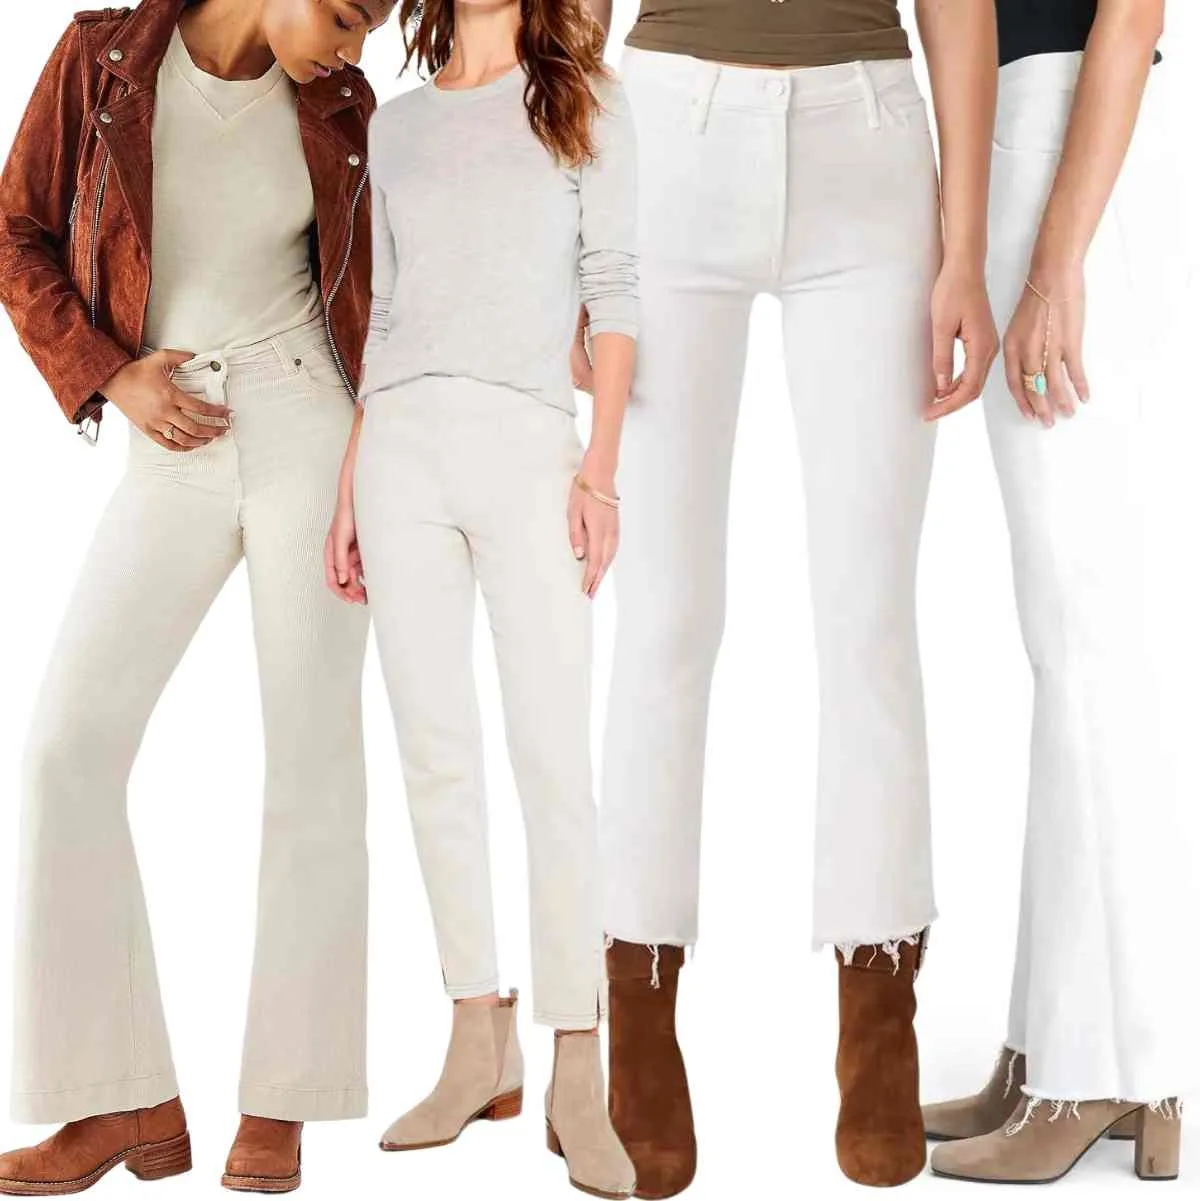 Collage of cropped view of 4 women wearing different white jeans and brown ankle boots outfits.